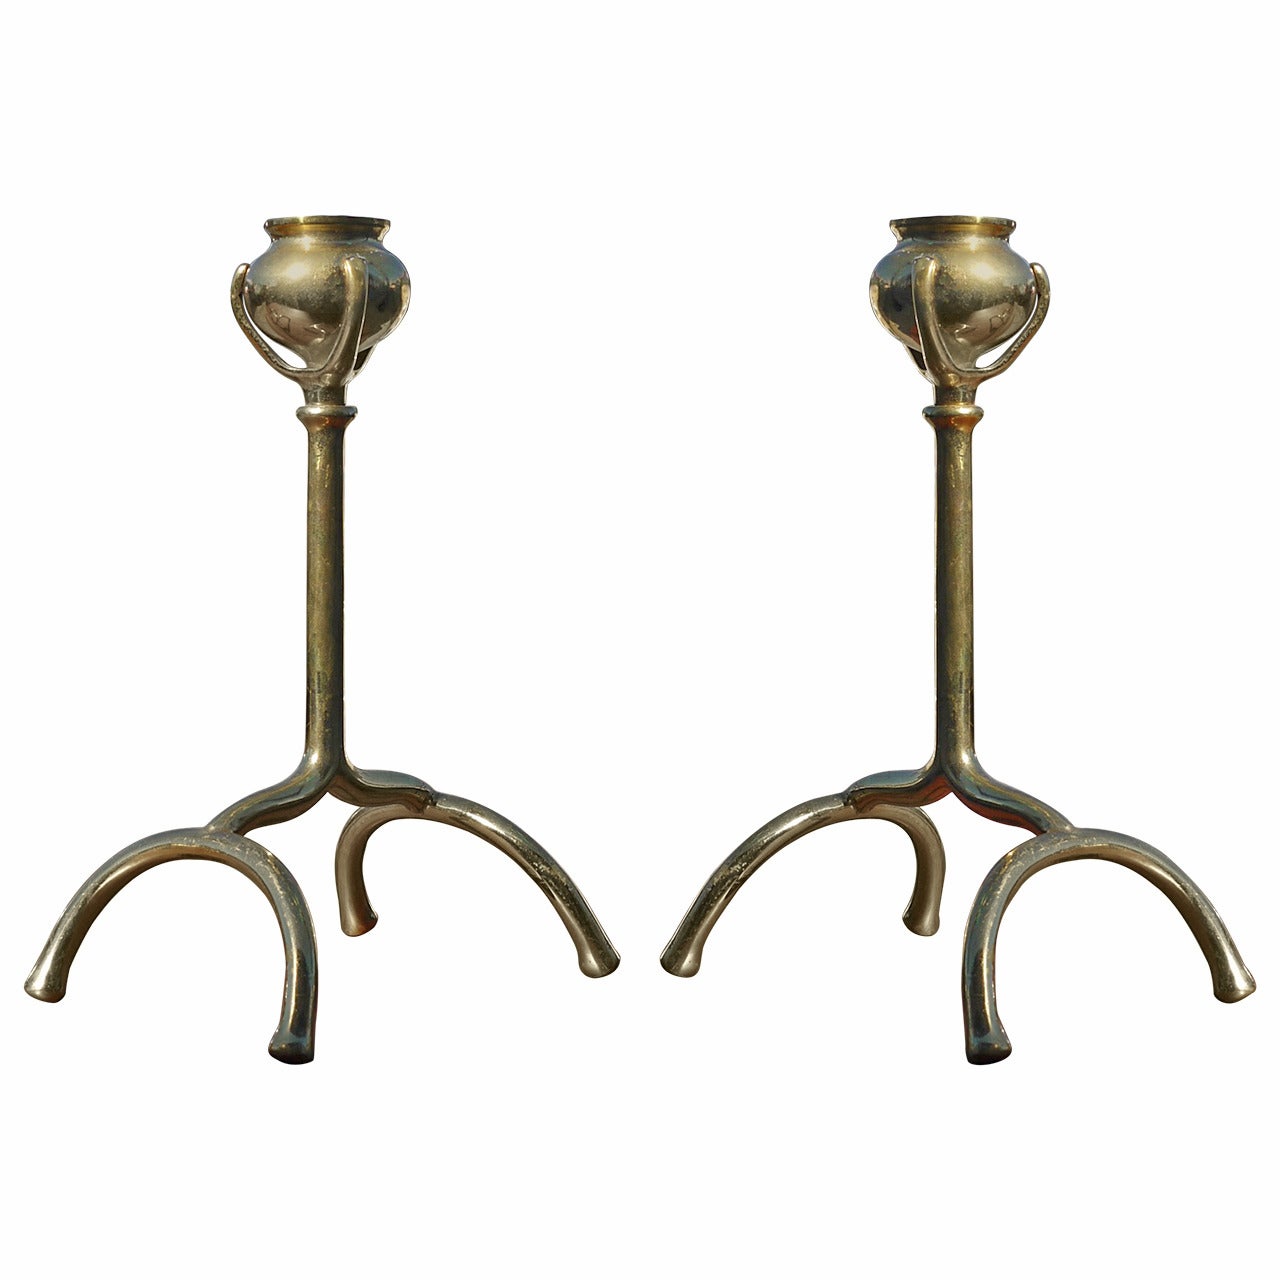 Pair of Tiffany Style Brass Candlesticks